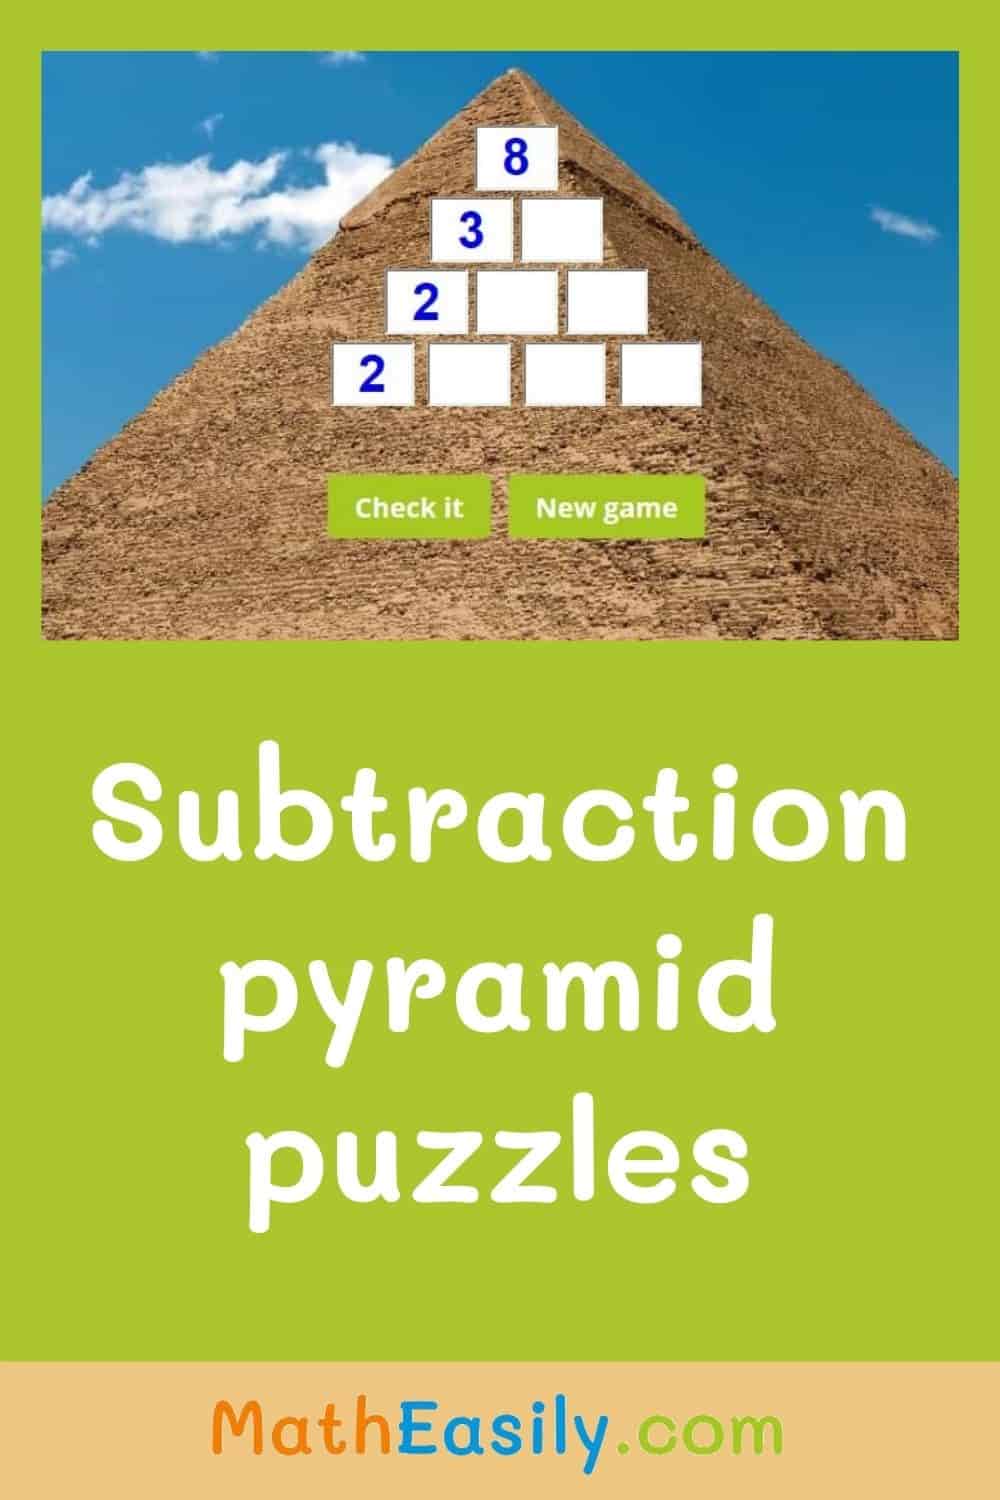 Subtraction pyramid puzzle game. Subtraction puzzles online. Addition and subtraction pyramids. Missing number pyramid puzzle.